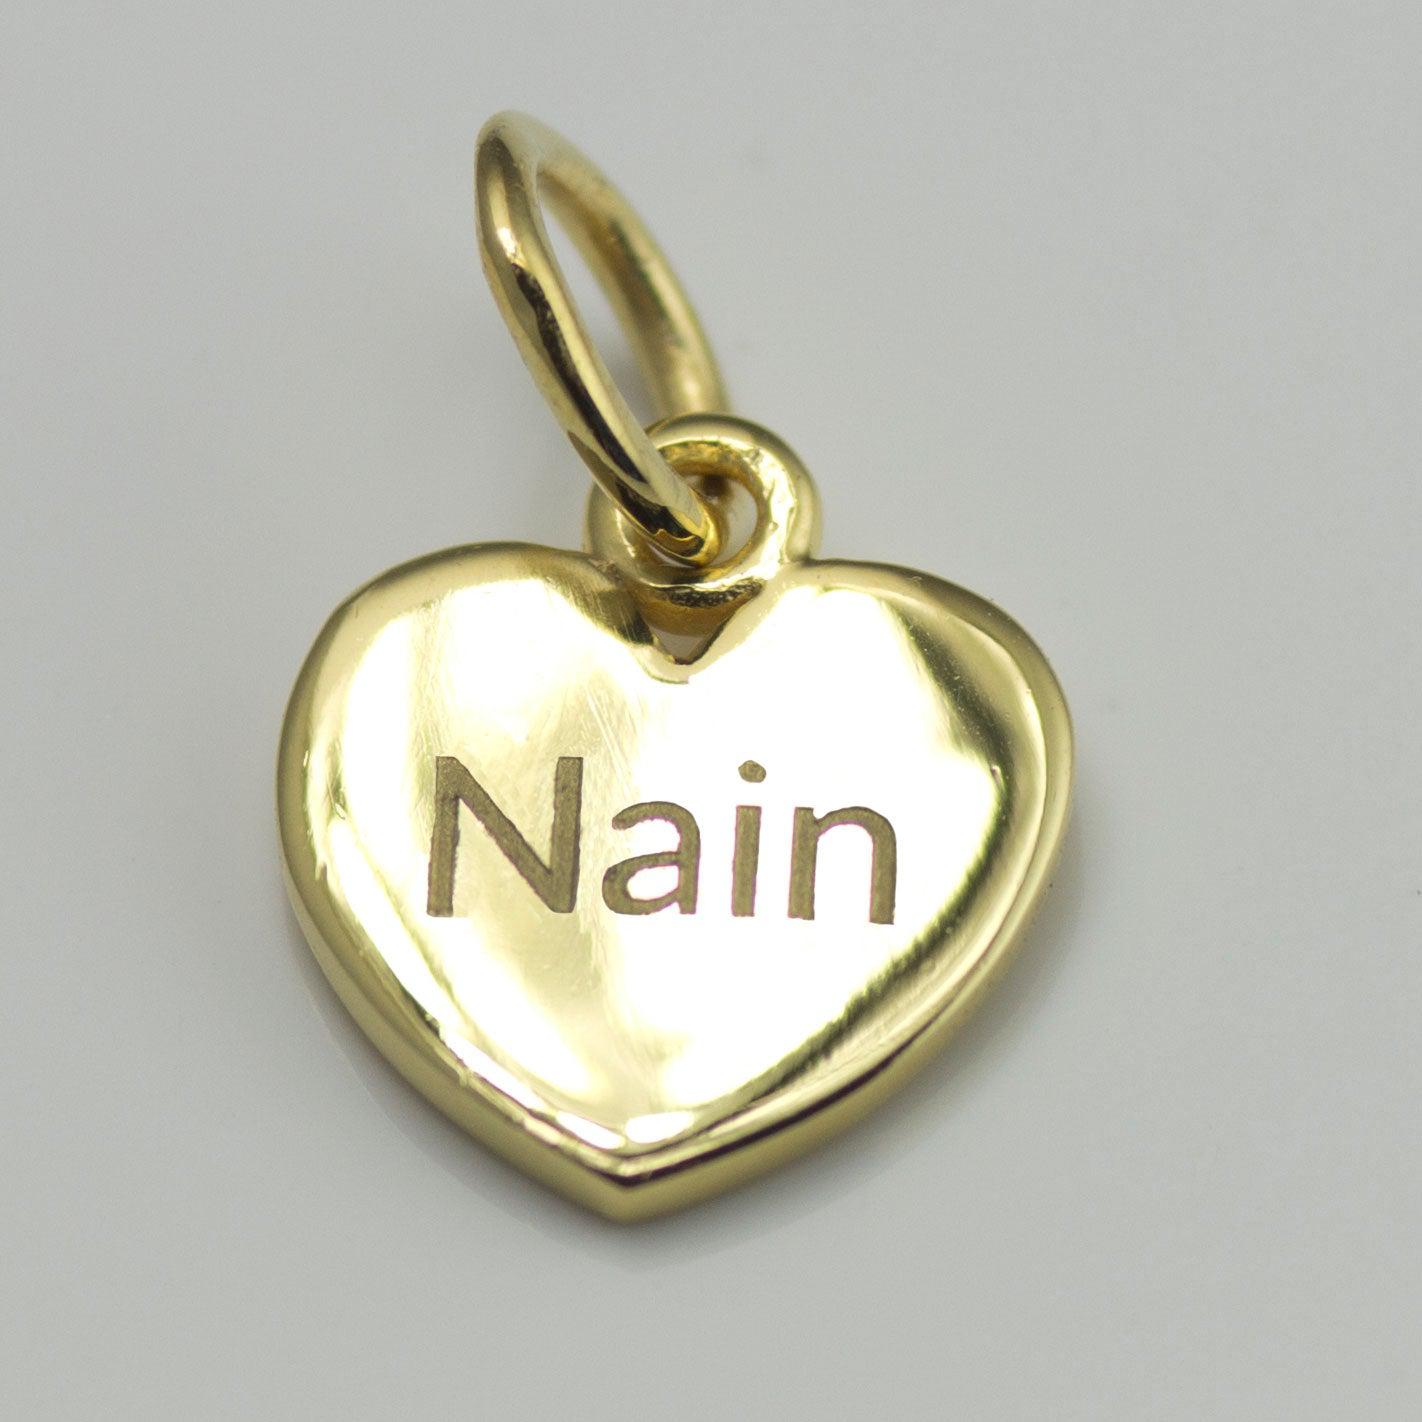 Pendant / Charm - Nan - Nain - Sterling Silver or Gold Plated-The Welsh Gift Shop